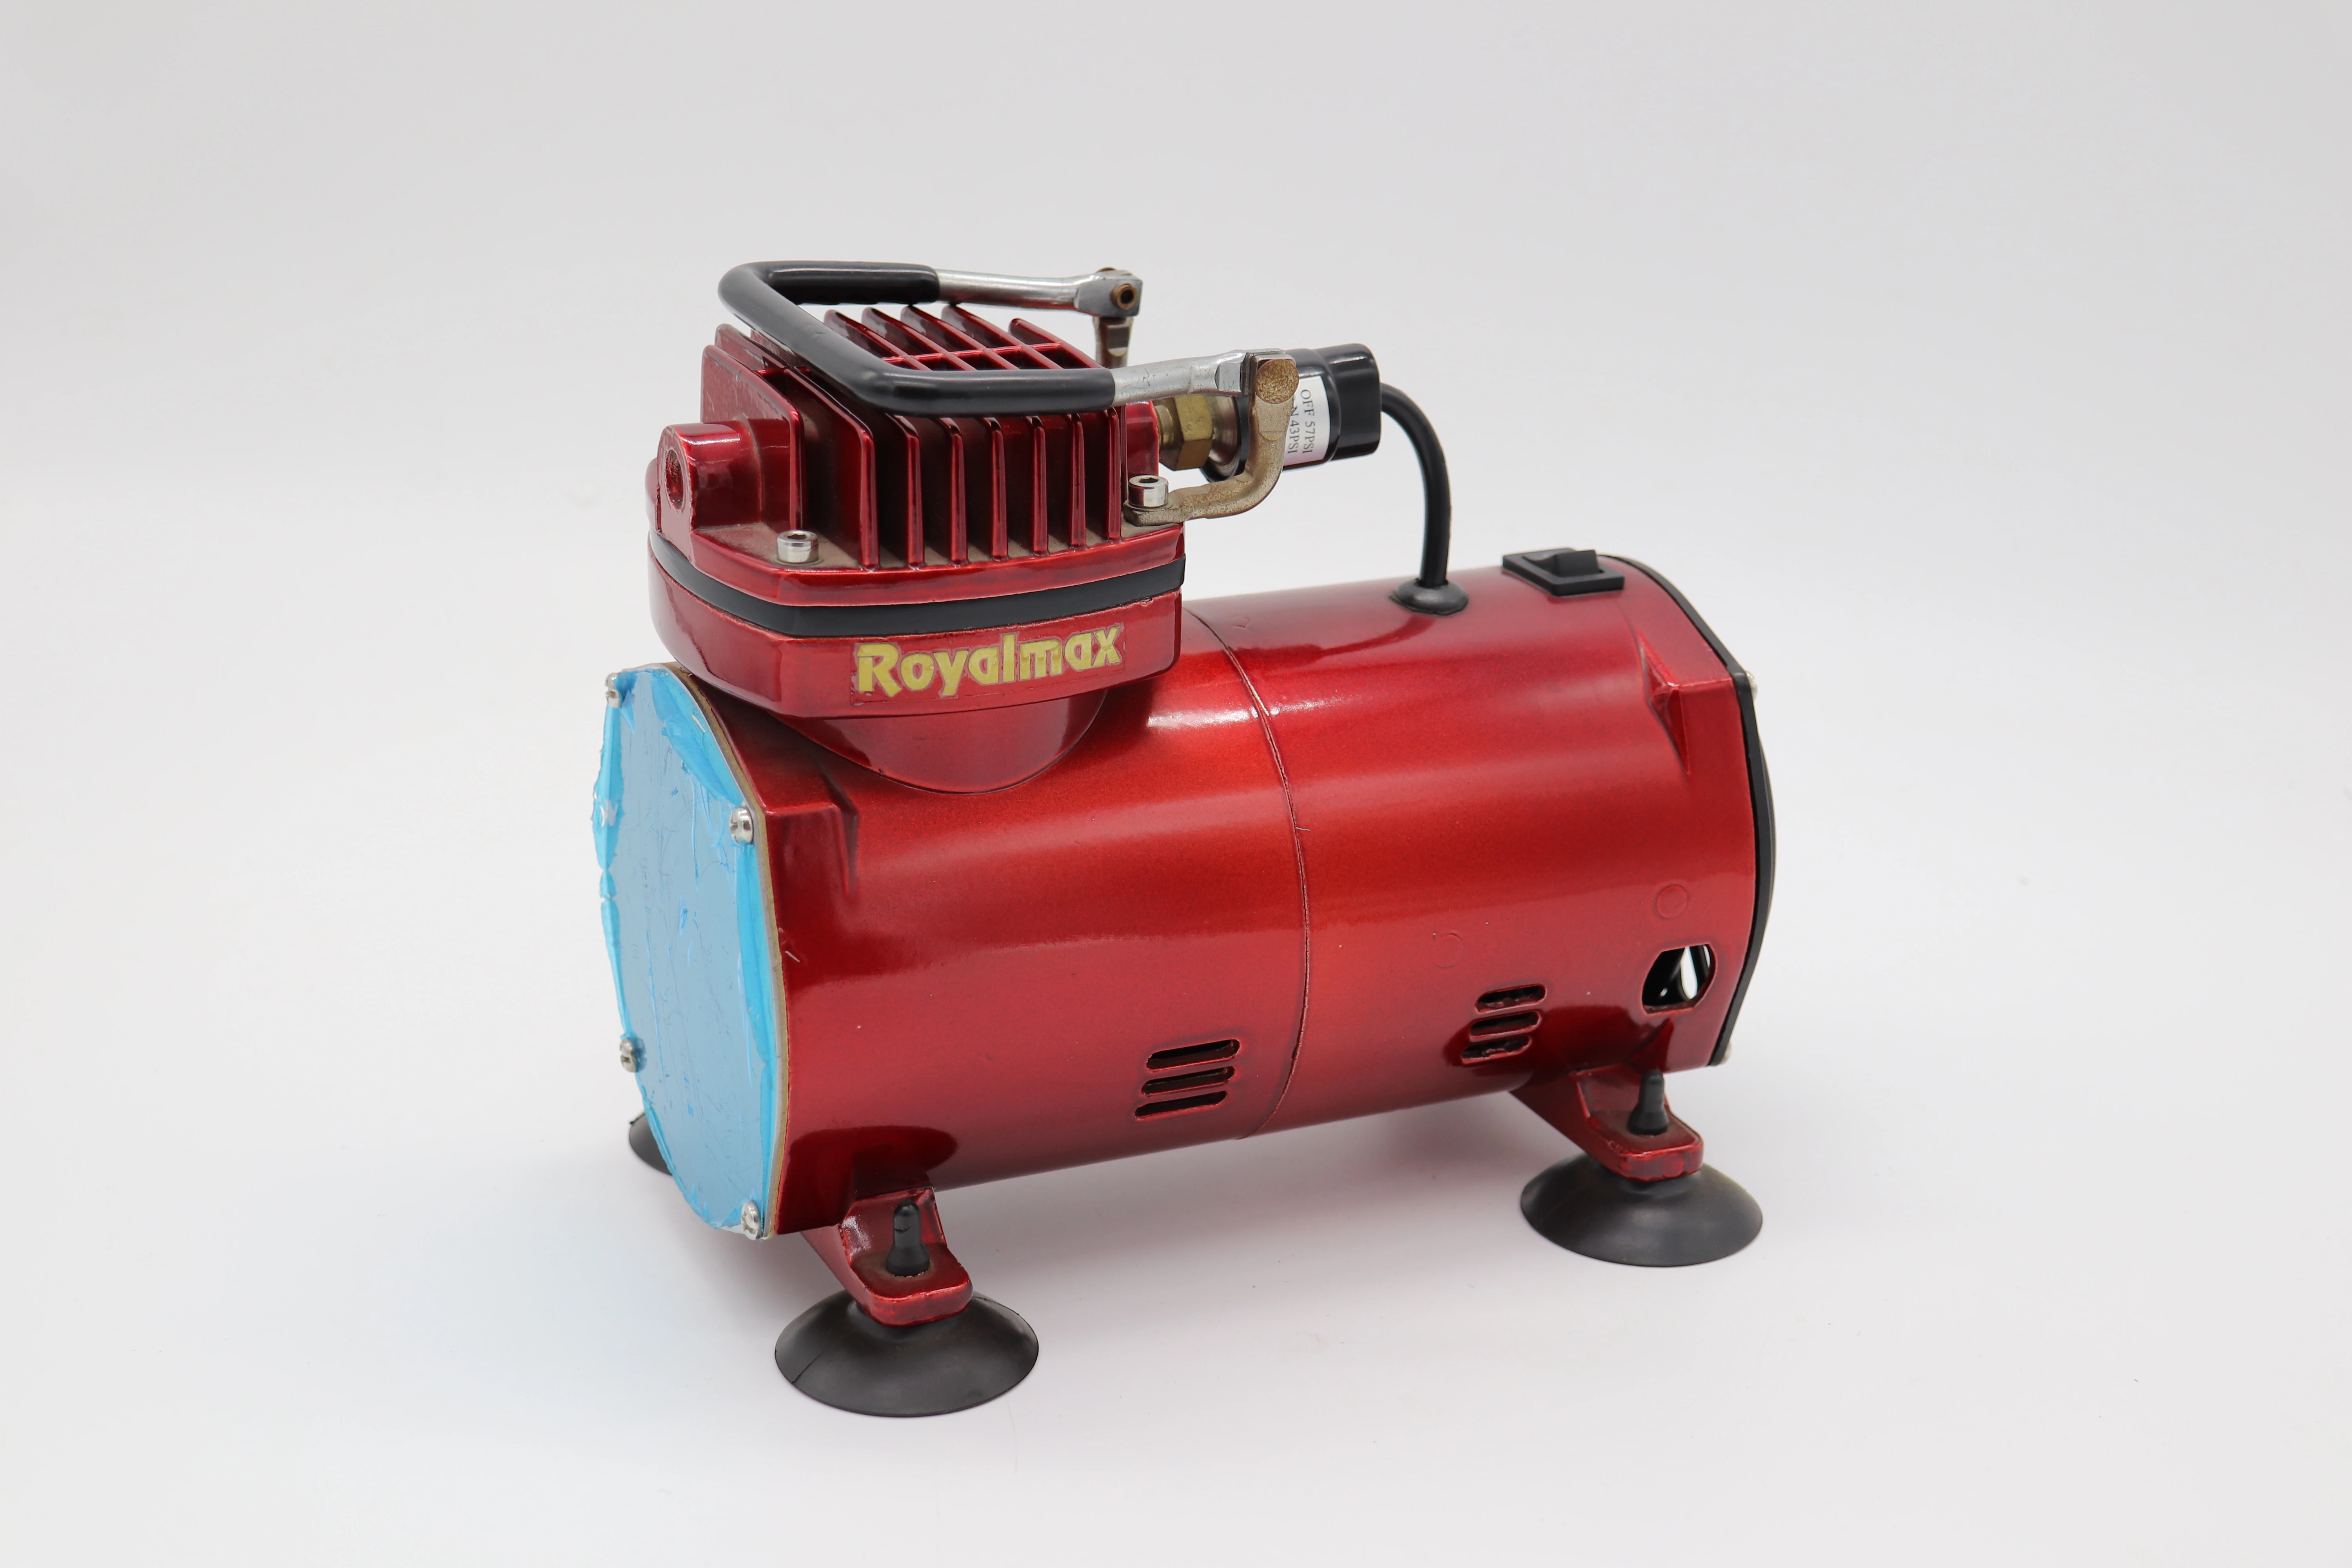 Mini tattoo/air compressor portable TC-20B(red) for makeup,painting body.airbrush compressor